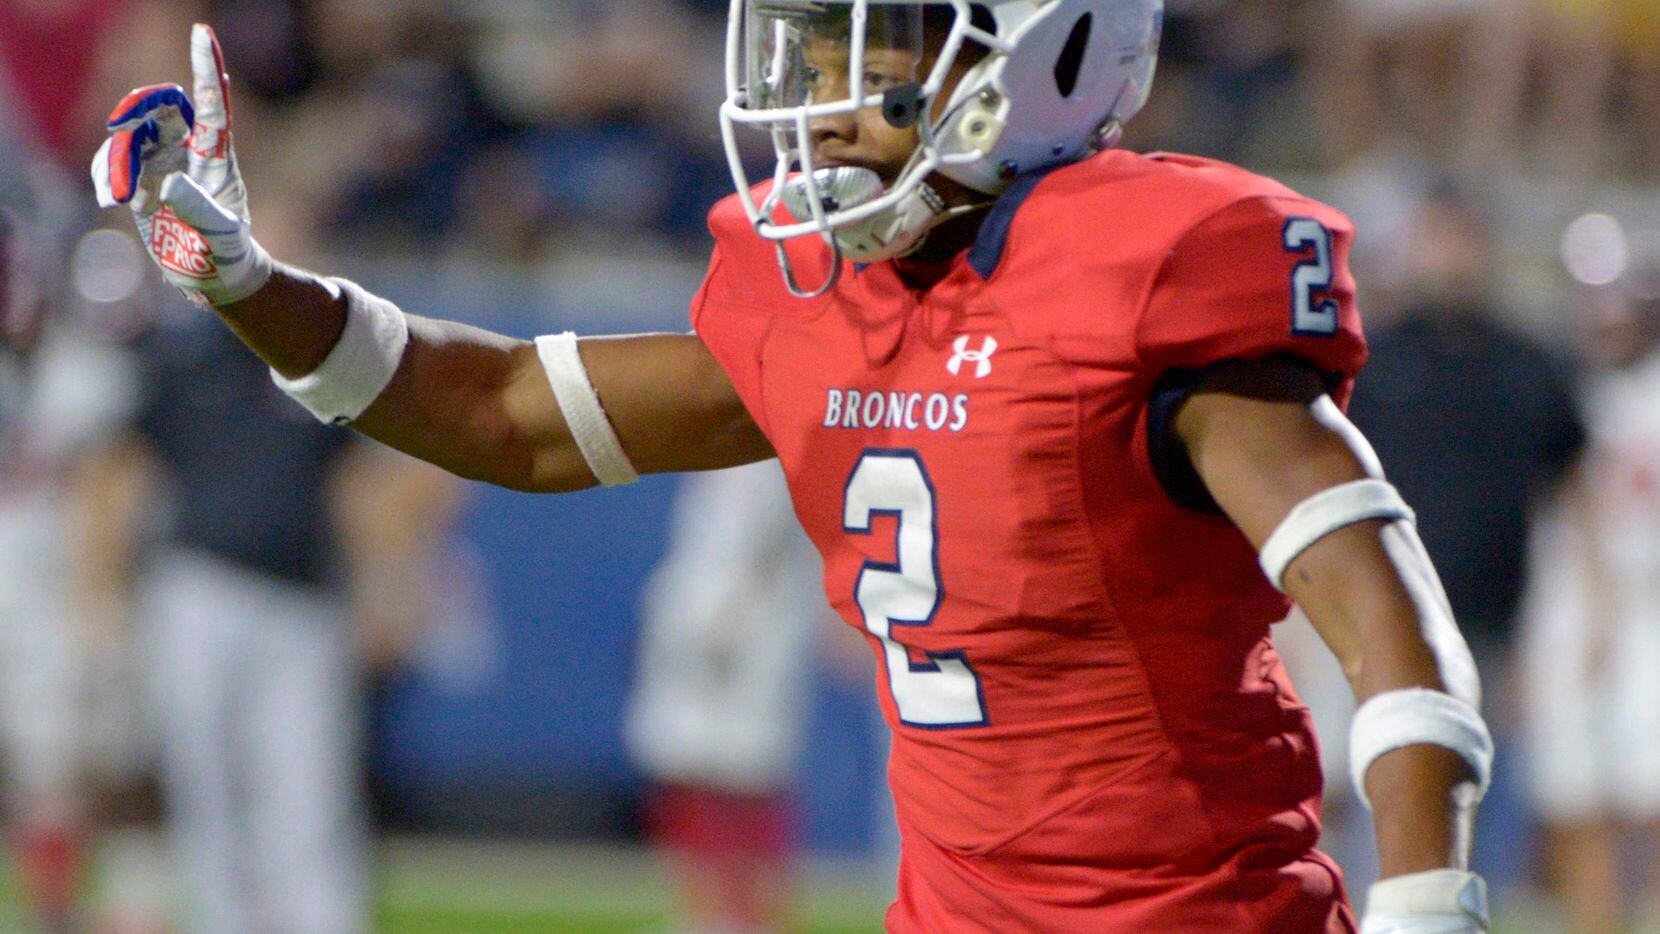 McKinney Boyd’s Ty Bolden celebrate after a fourth down stop in the first quarter of a high...